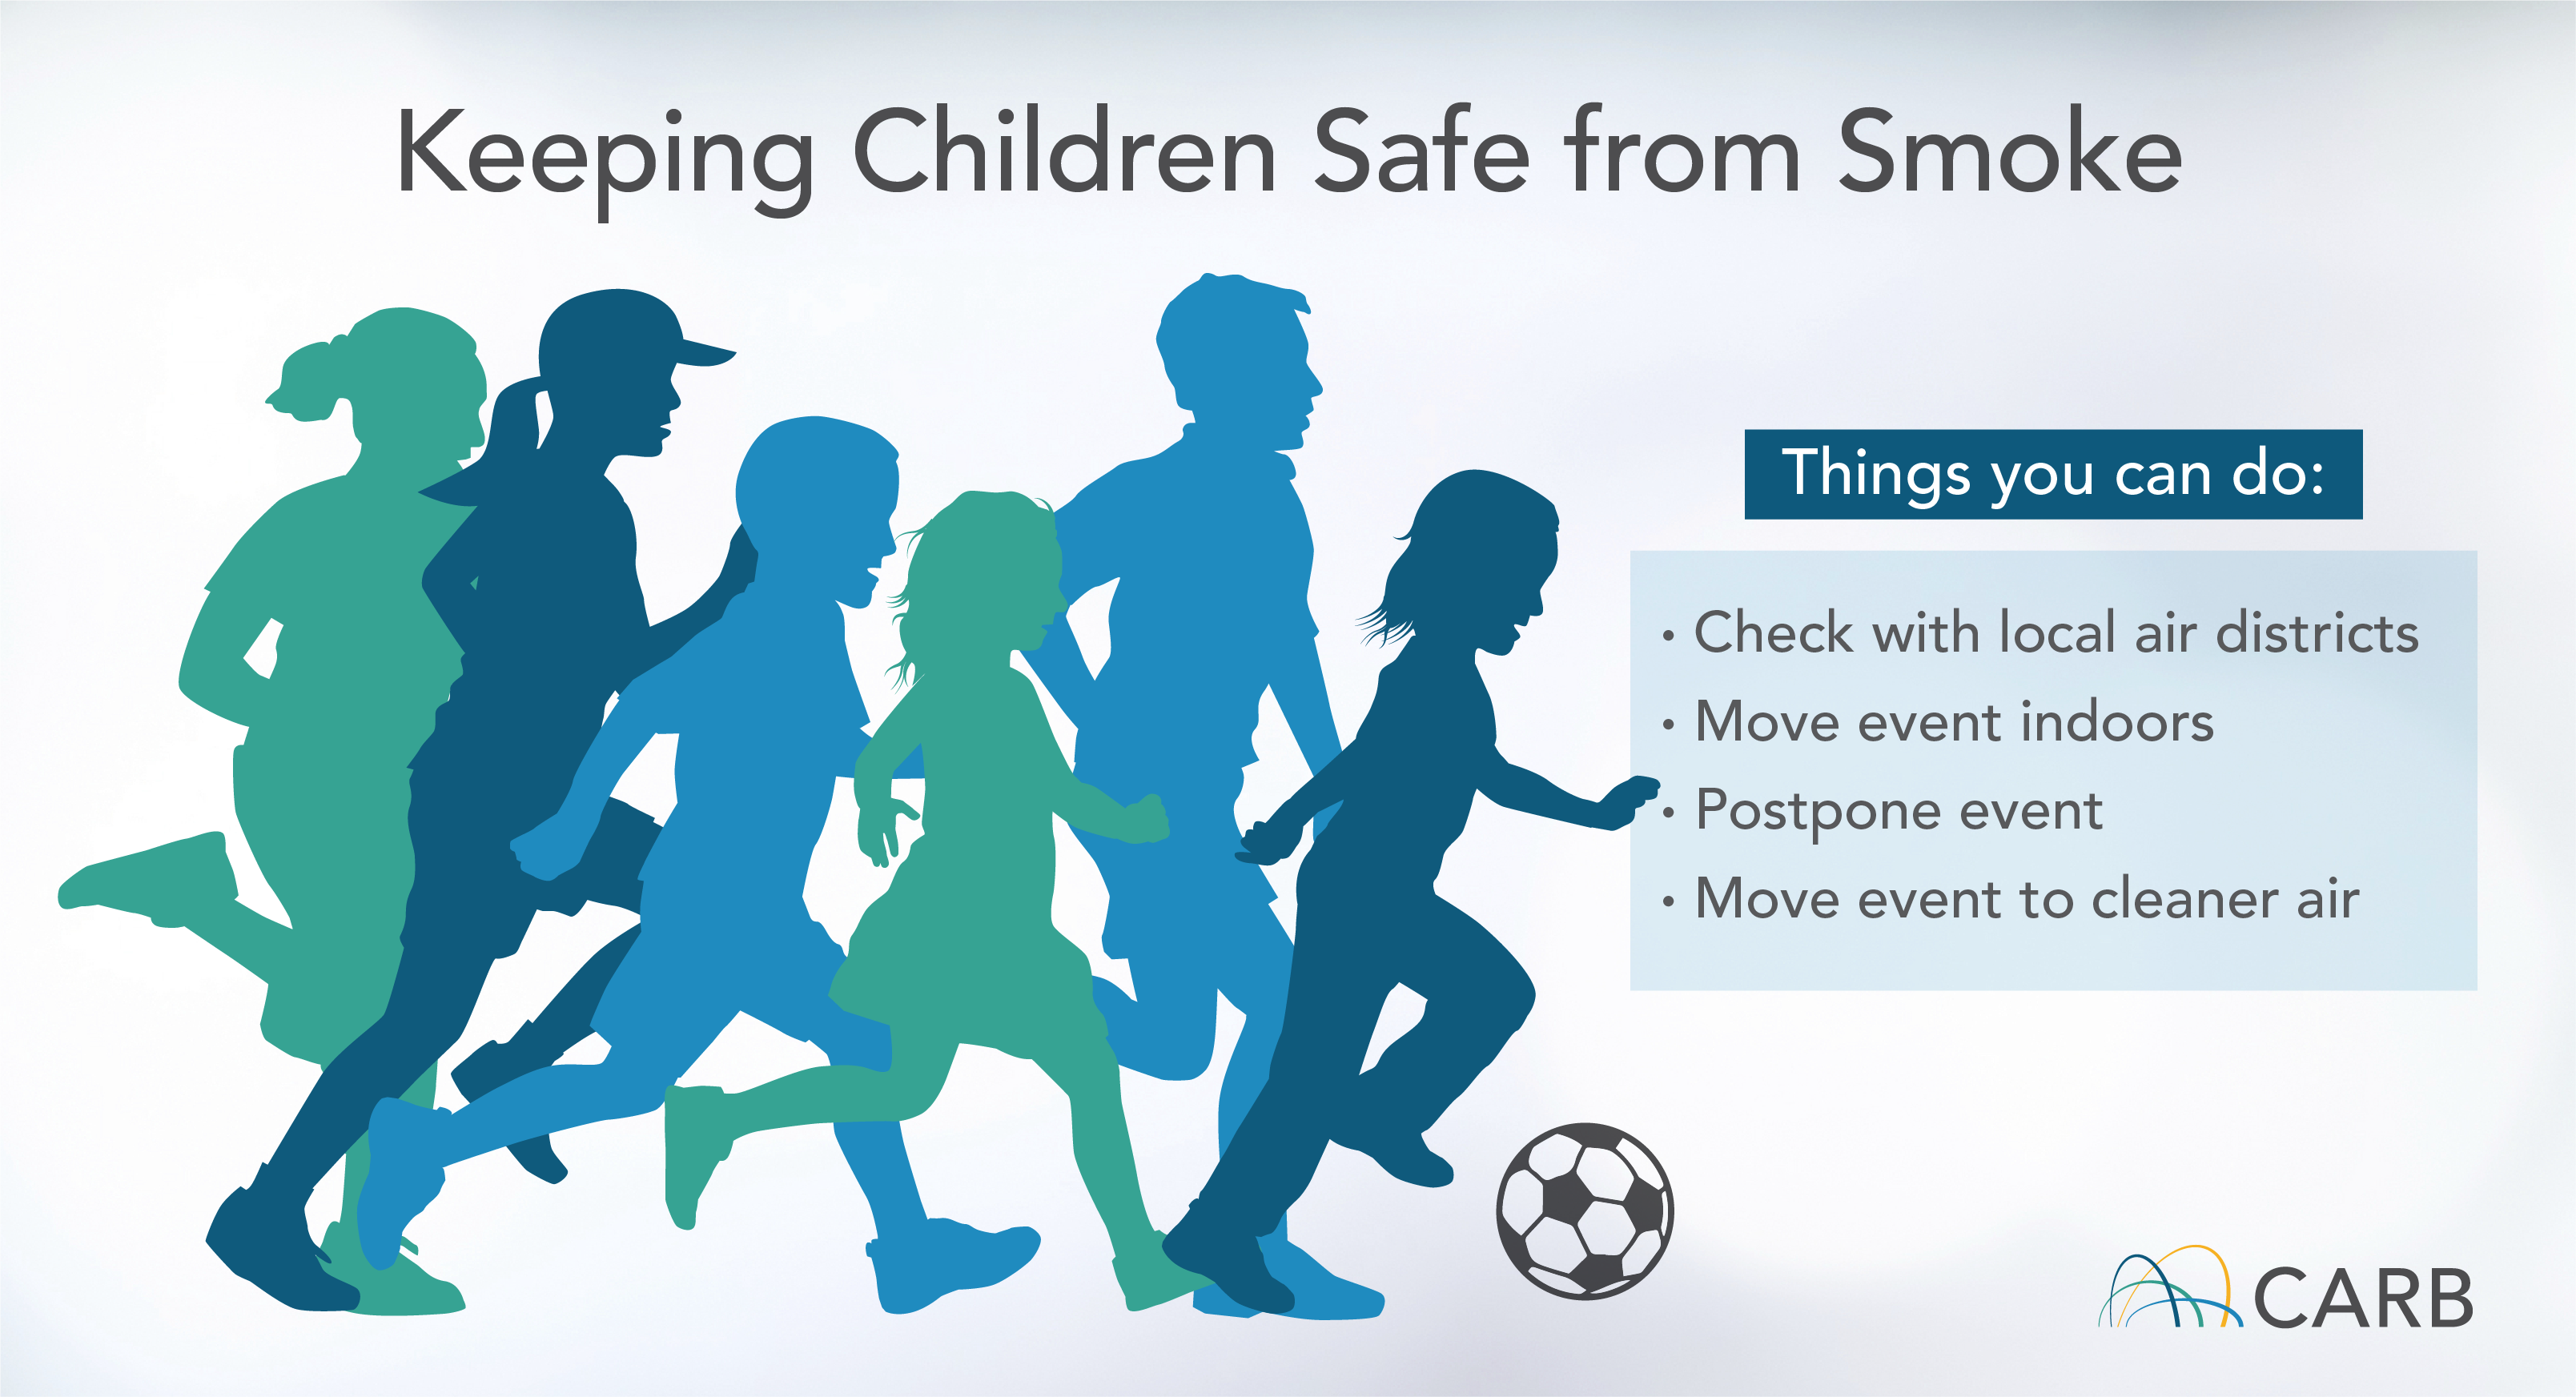 Keeping Children Safe from Smoke: Things you can do - Check with local air districts. Move event indoors. Postpone event. Move event to cleaner air.